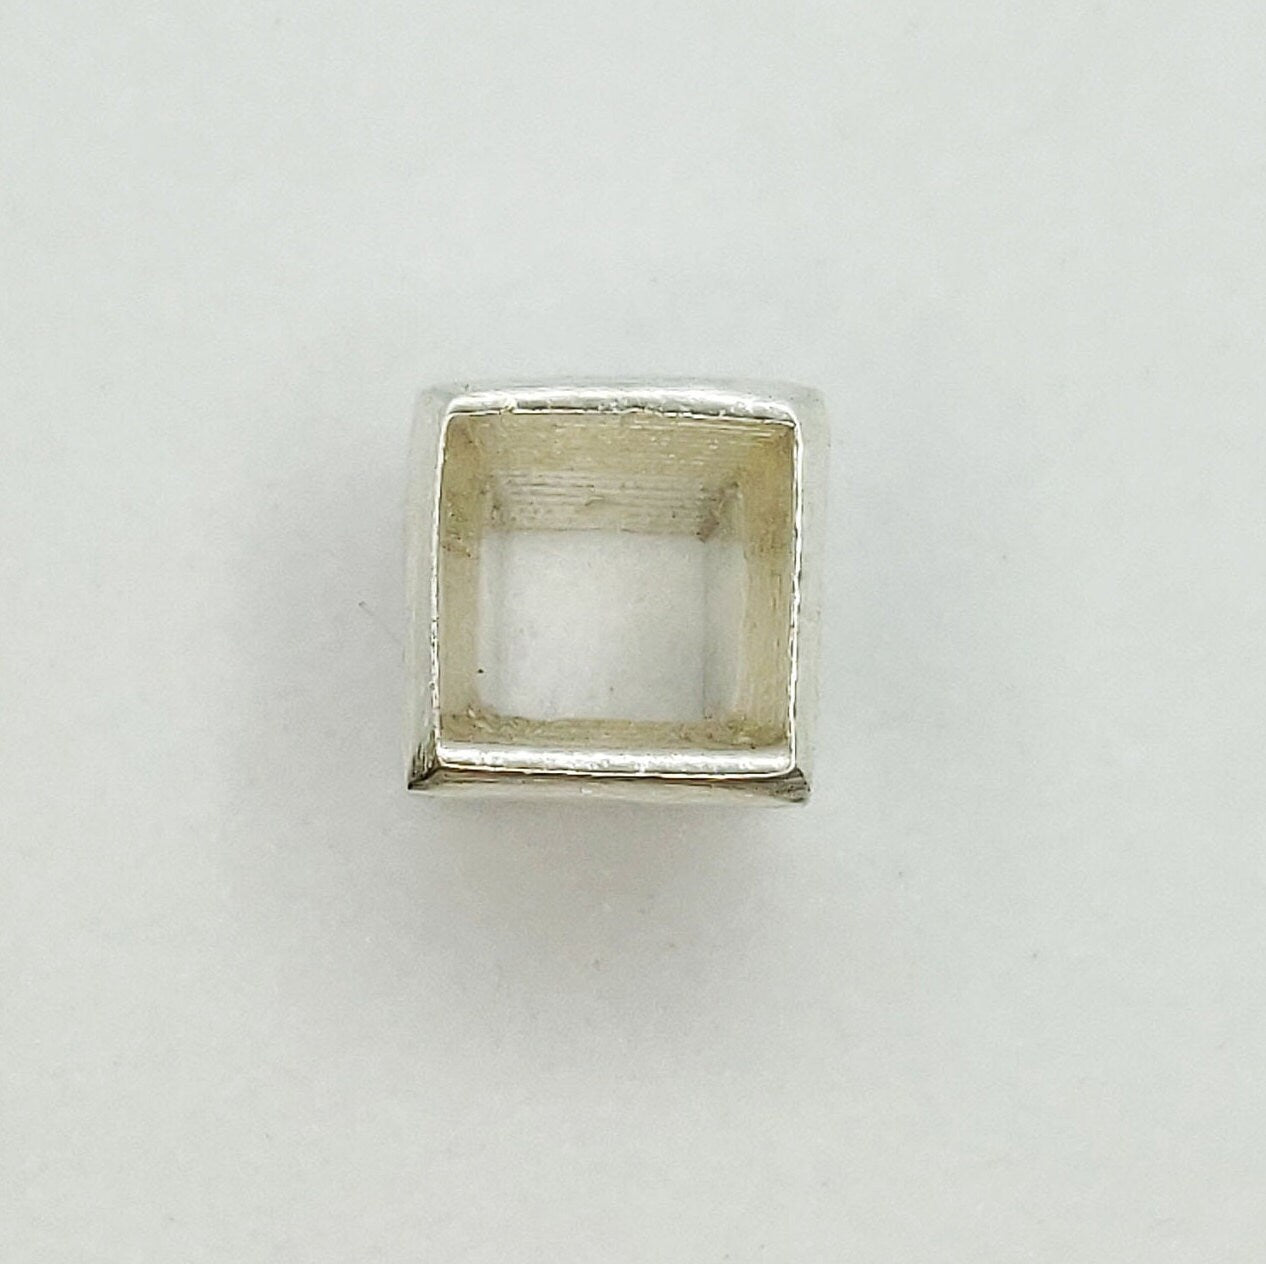 4mm Silver Princess Cut Gemstone Rubover Setting. Cast Recycled Silver Square Bezel. Jewelry Making Supplies. 9ct Yellow Gold Square Setting